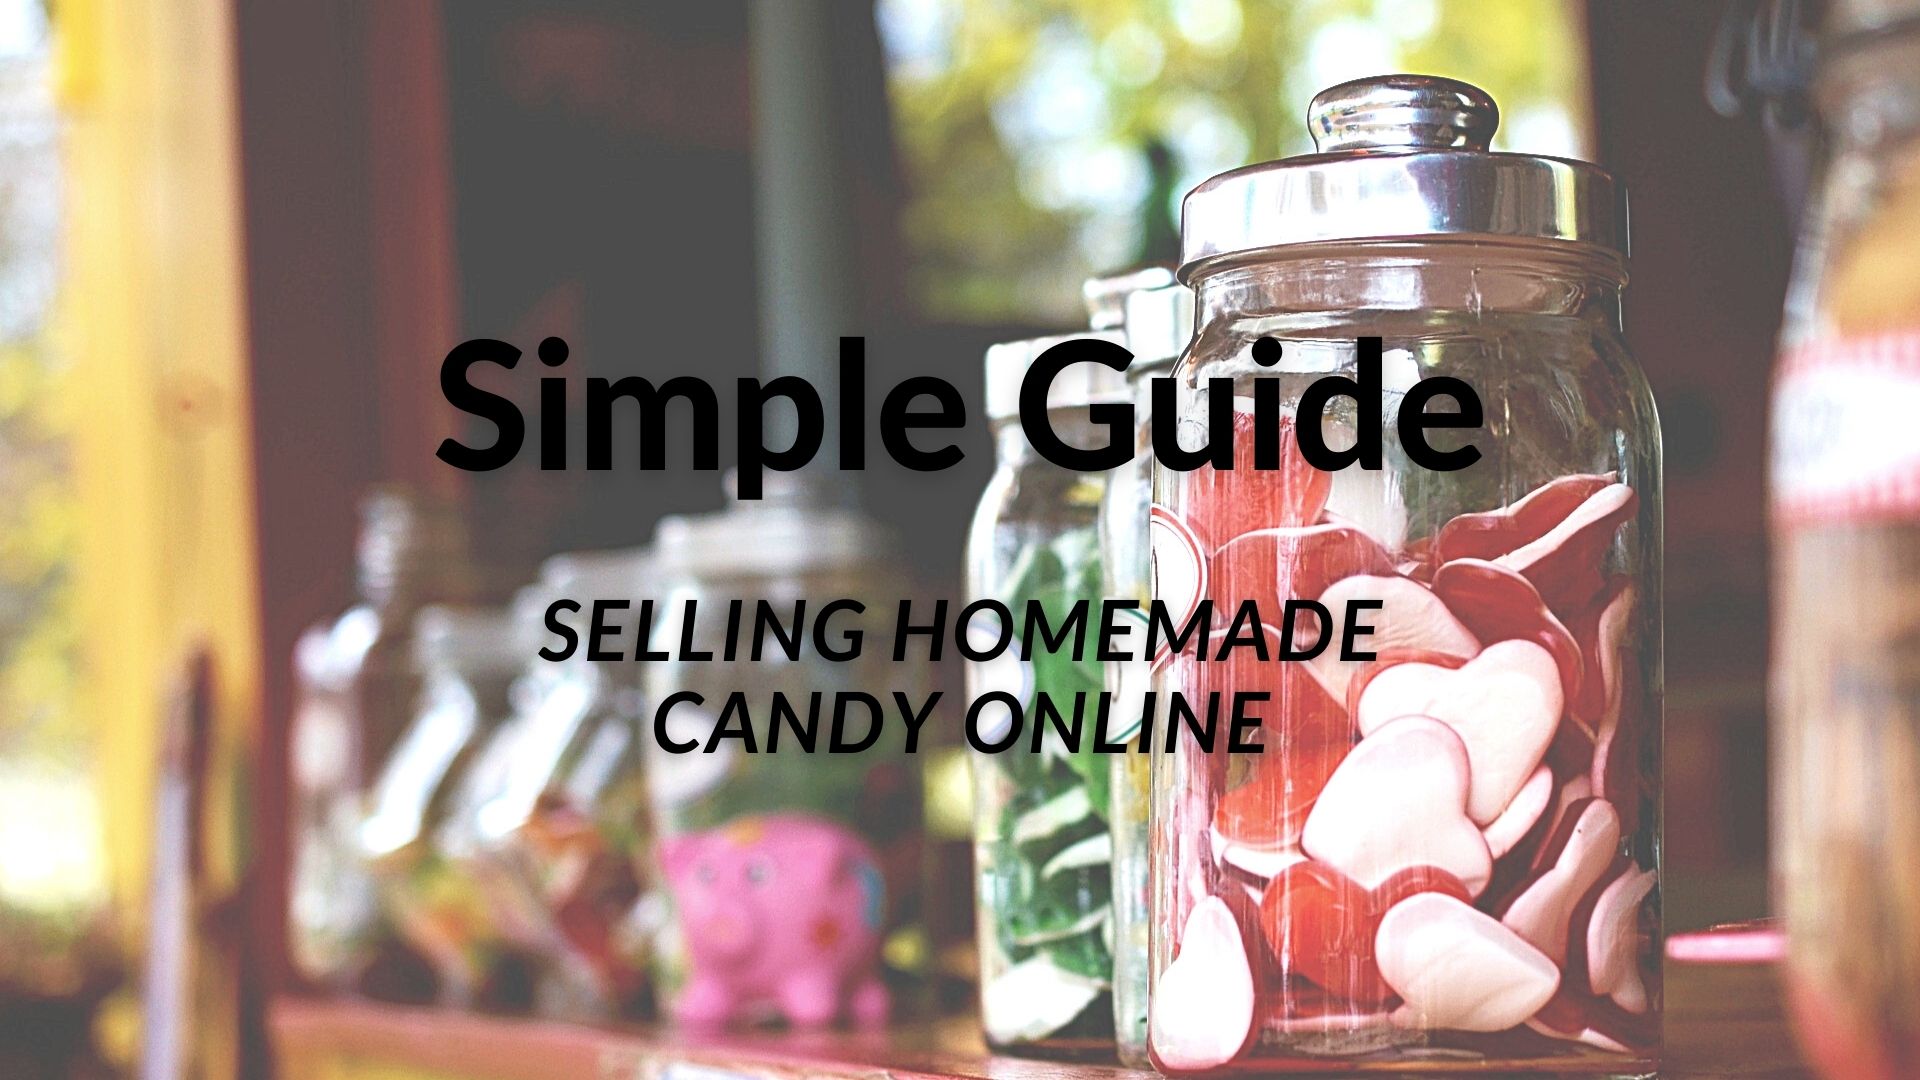 5 Steps to Start an Online Candy Store From Home